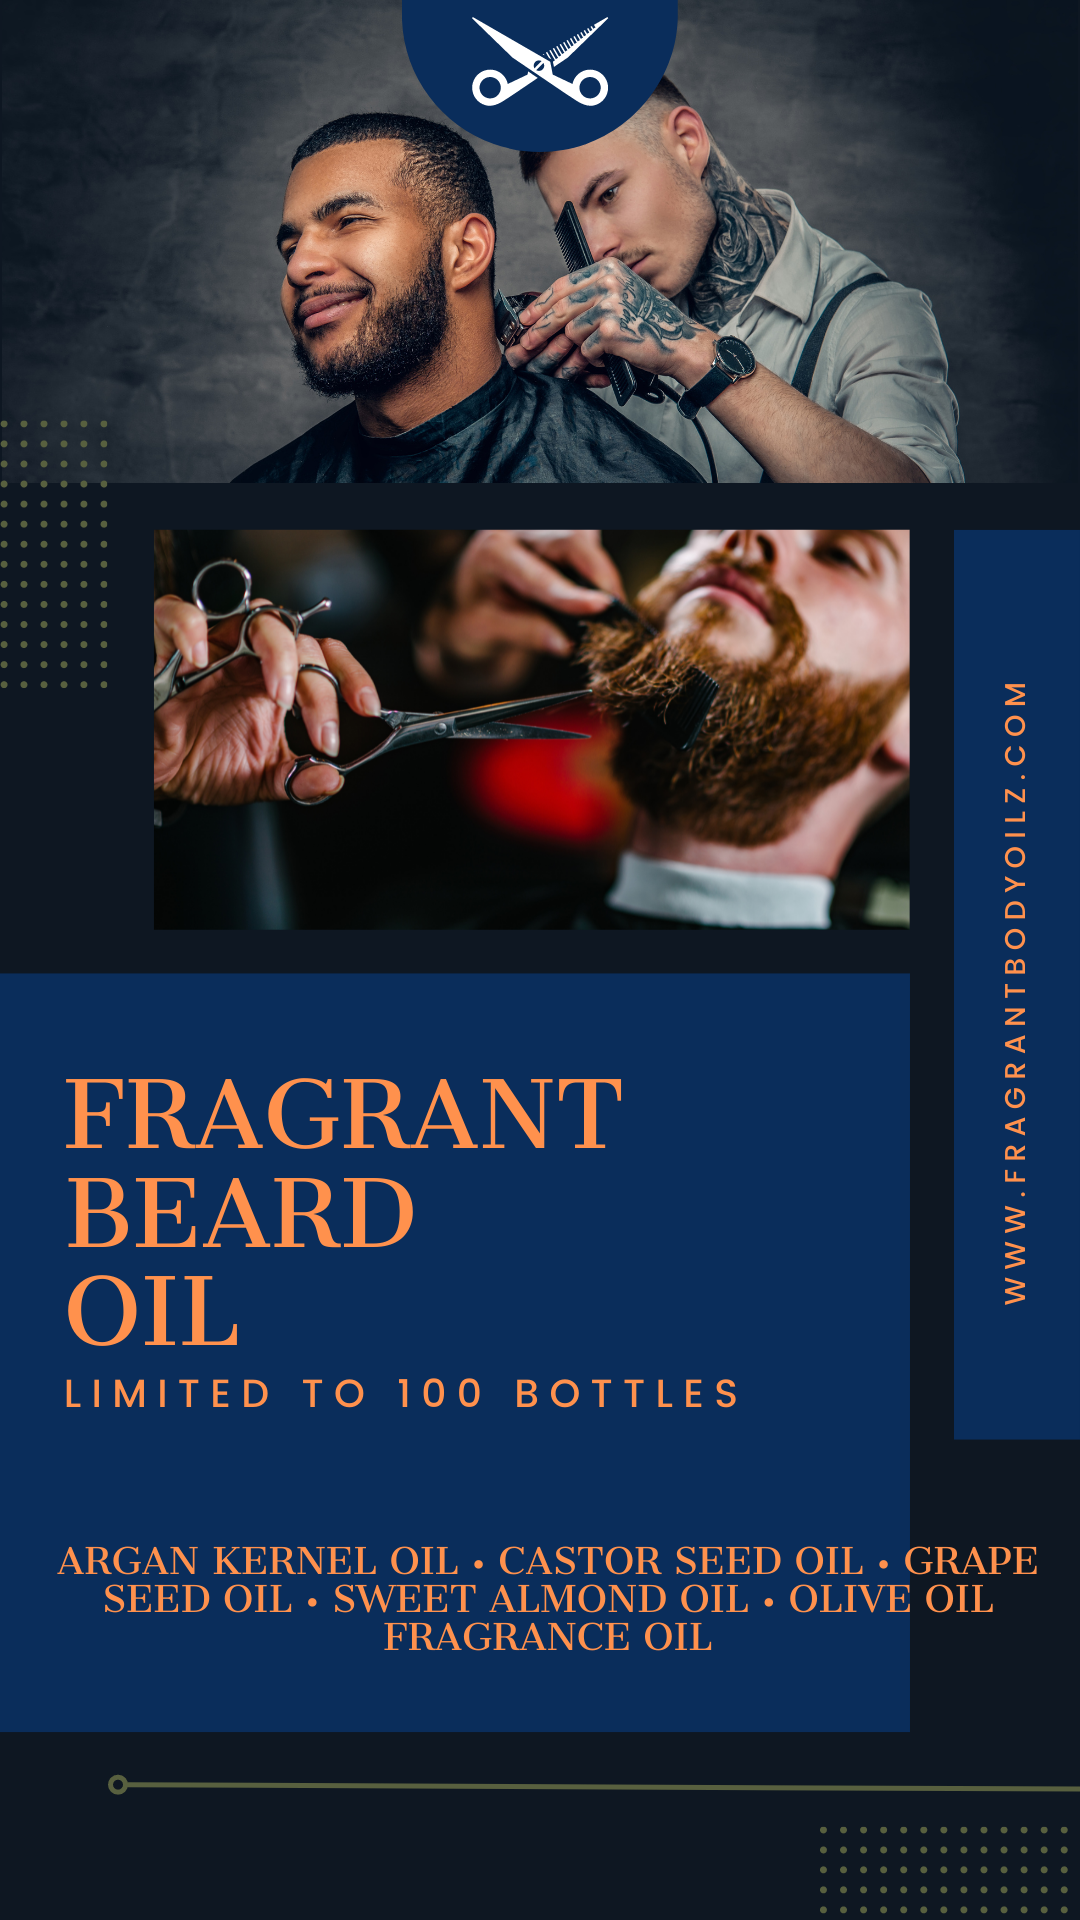 1oz Fragrant Beard Oil - Limited Availability - 100 Bottle Release - Introductory Price